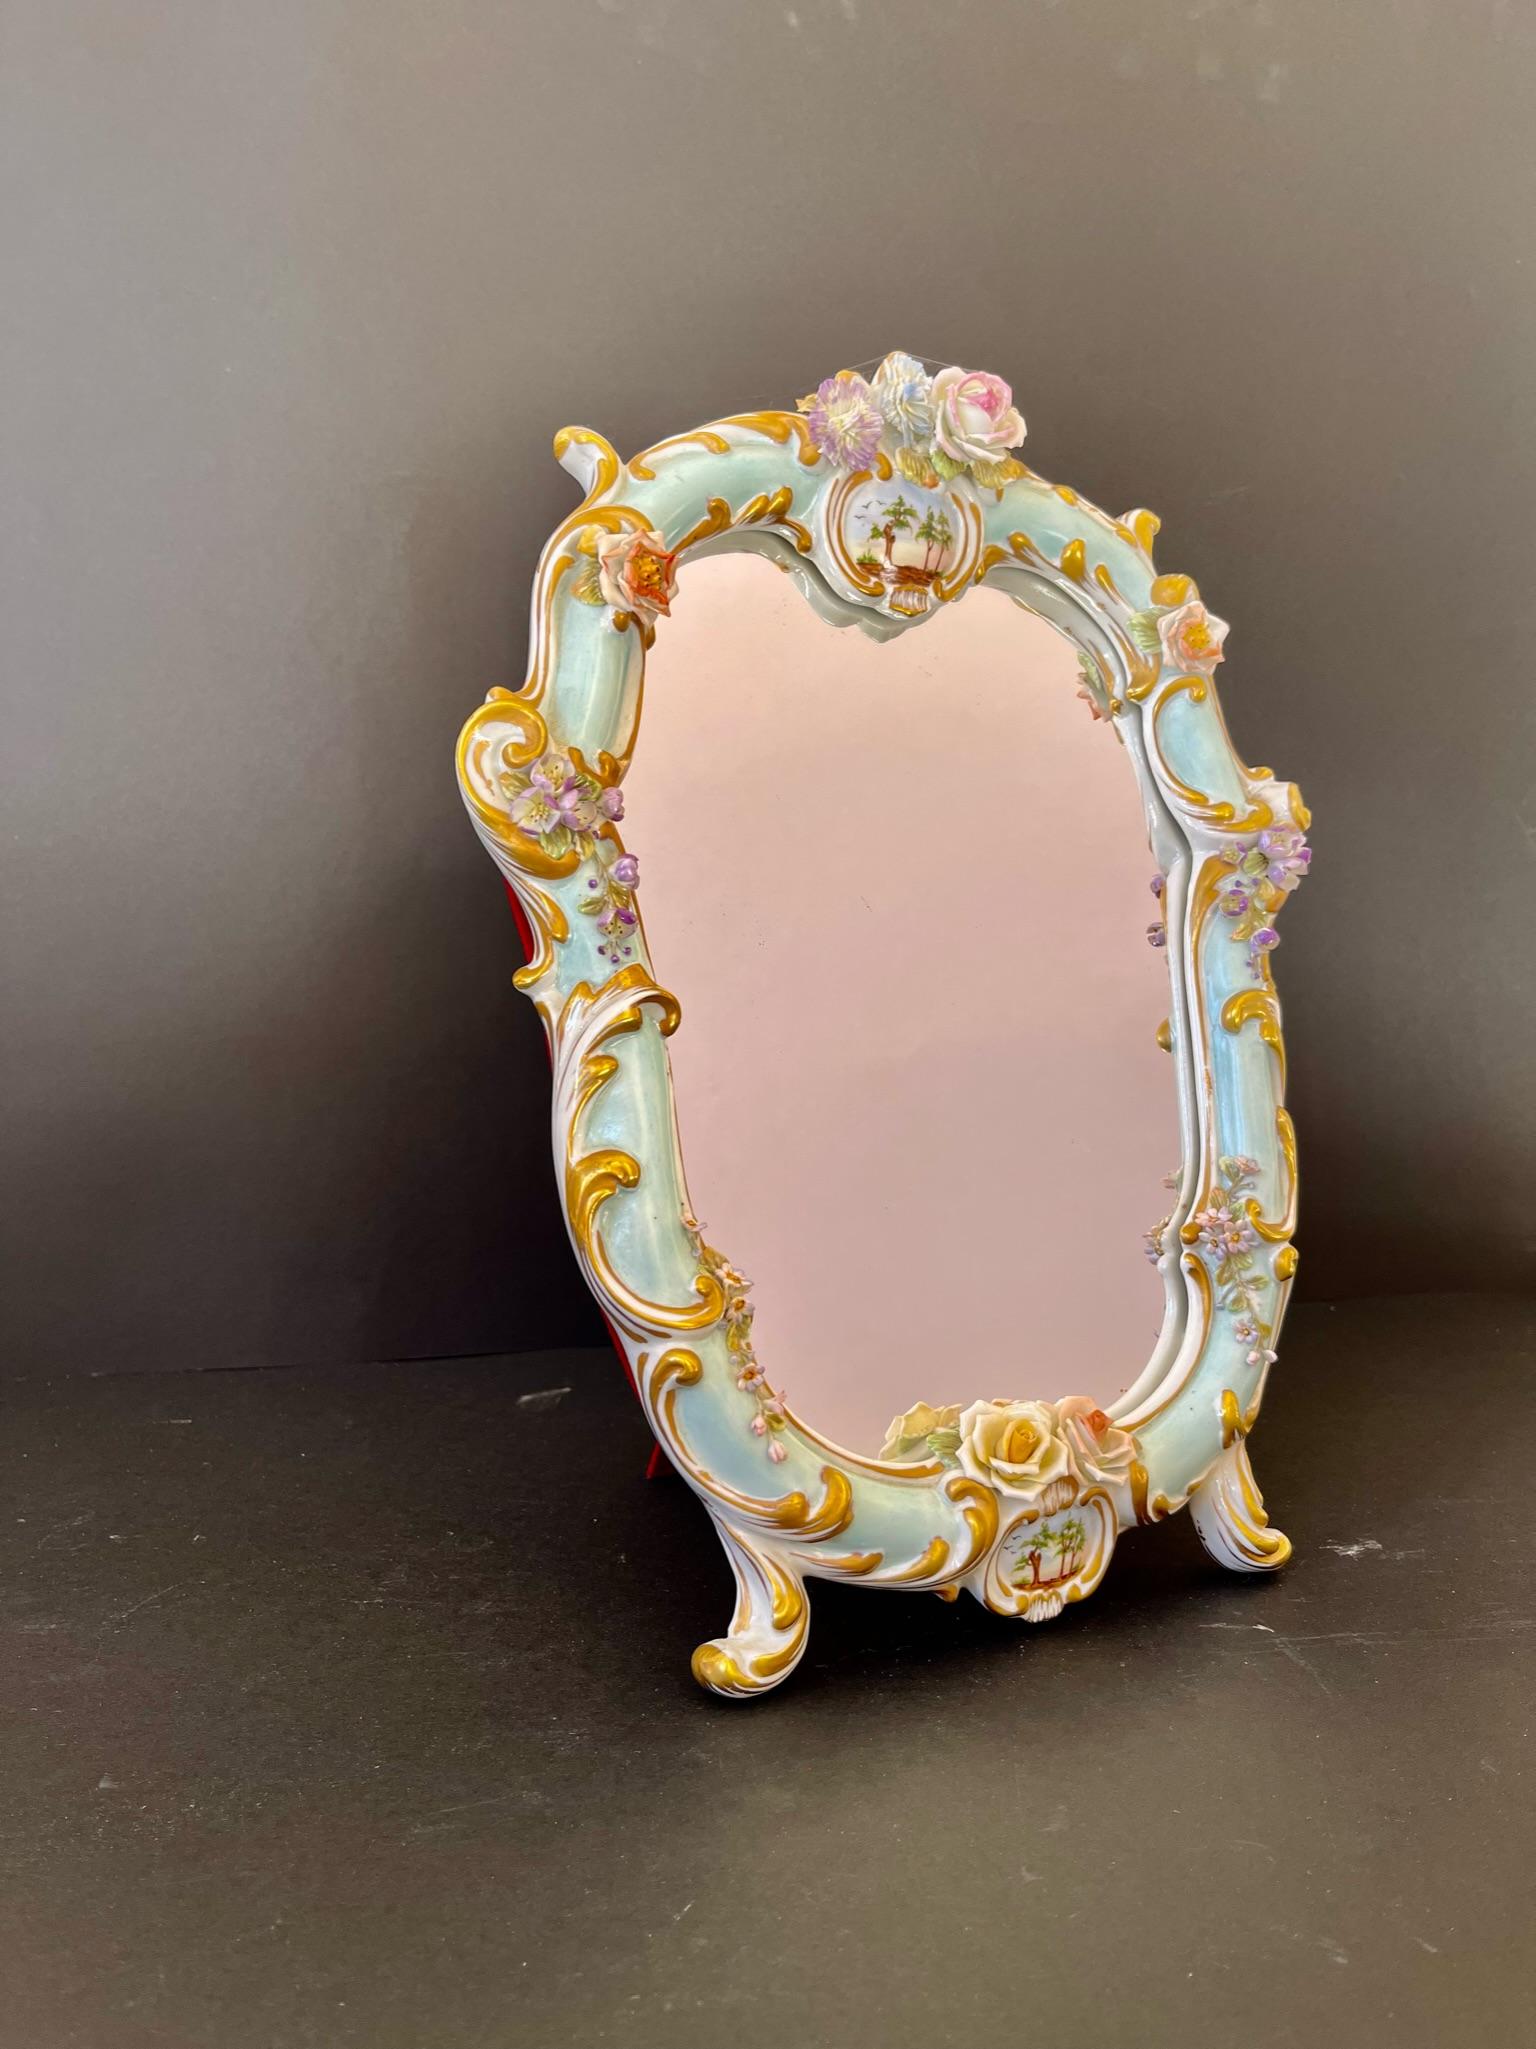 Small Mirror in Capodimonte Porcelain finely decorated in turquoise with gold highlights dating back to about 1950.
You can see very accurate particulars such as the roses and all the flowers and they are taken care of in the smallest detail, and we